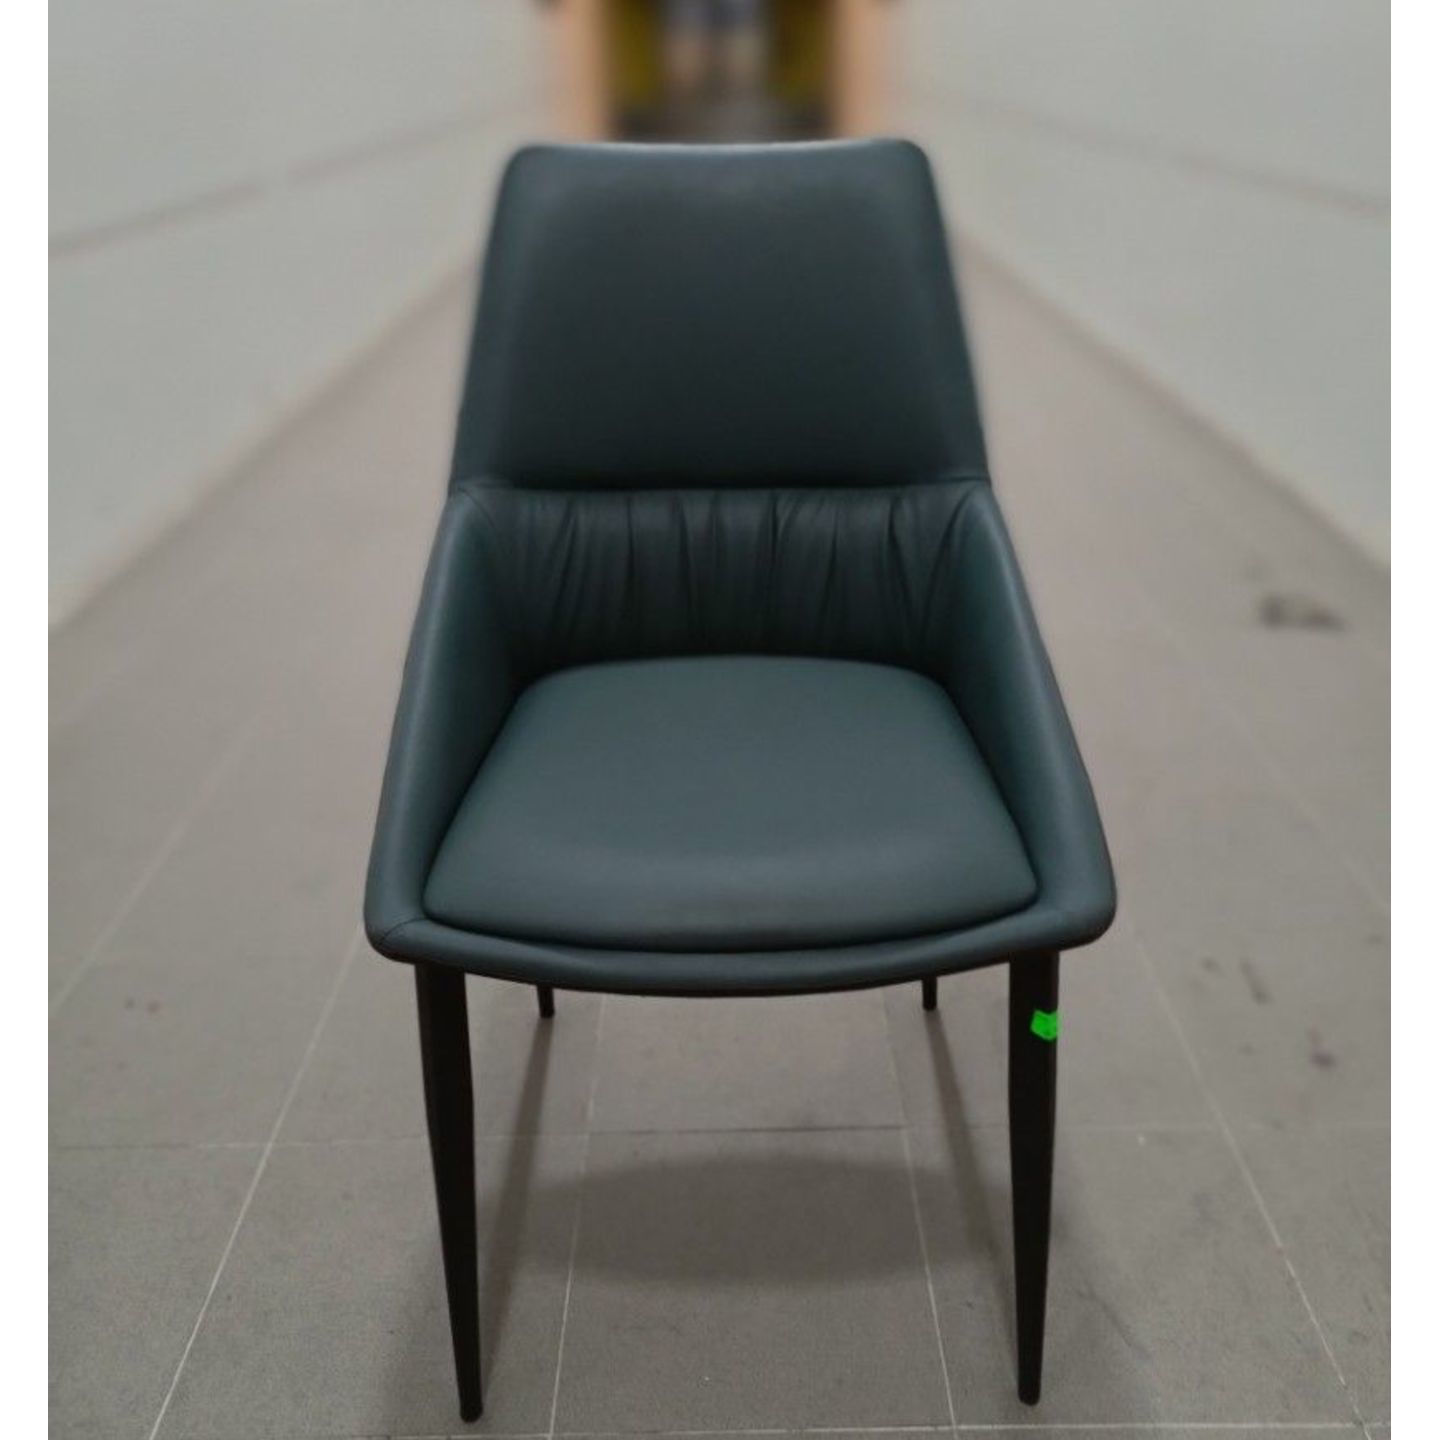 FIRE SALE - MIAMI Chair in JAZZ BLUE PU (ONE ONLY)